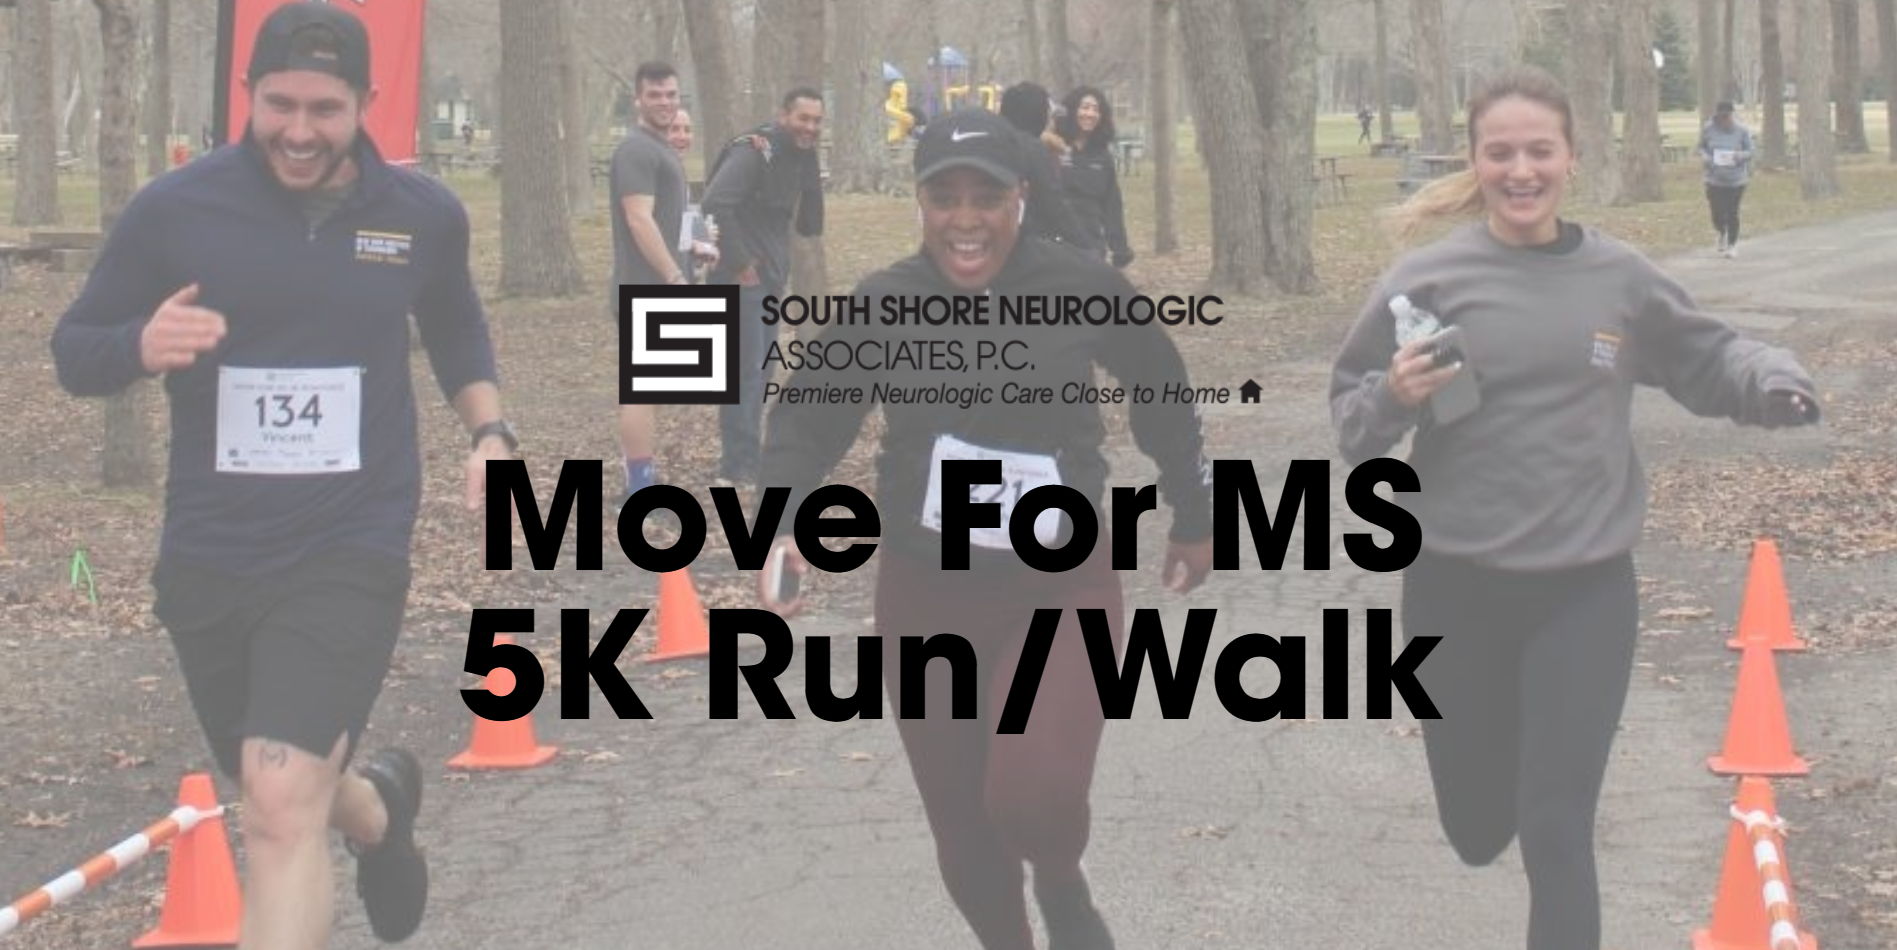 Move for MS 5K Run/Walk promotional image